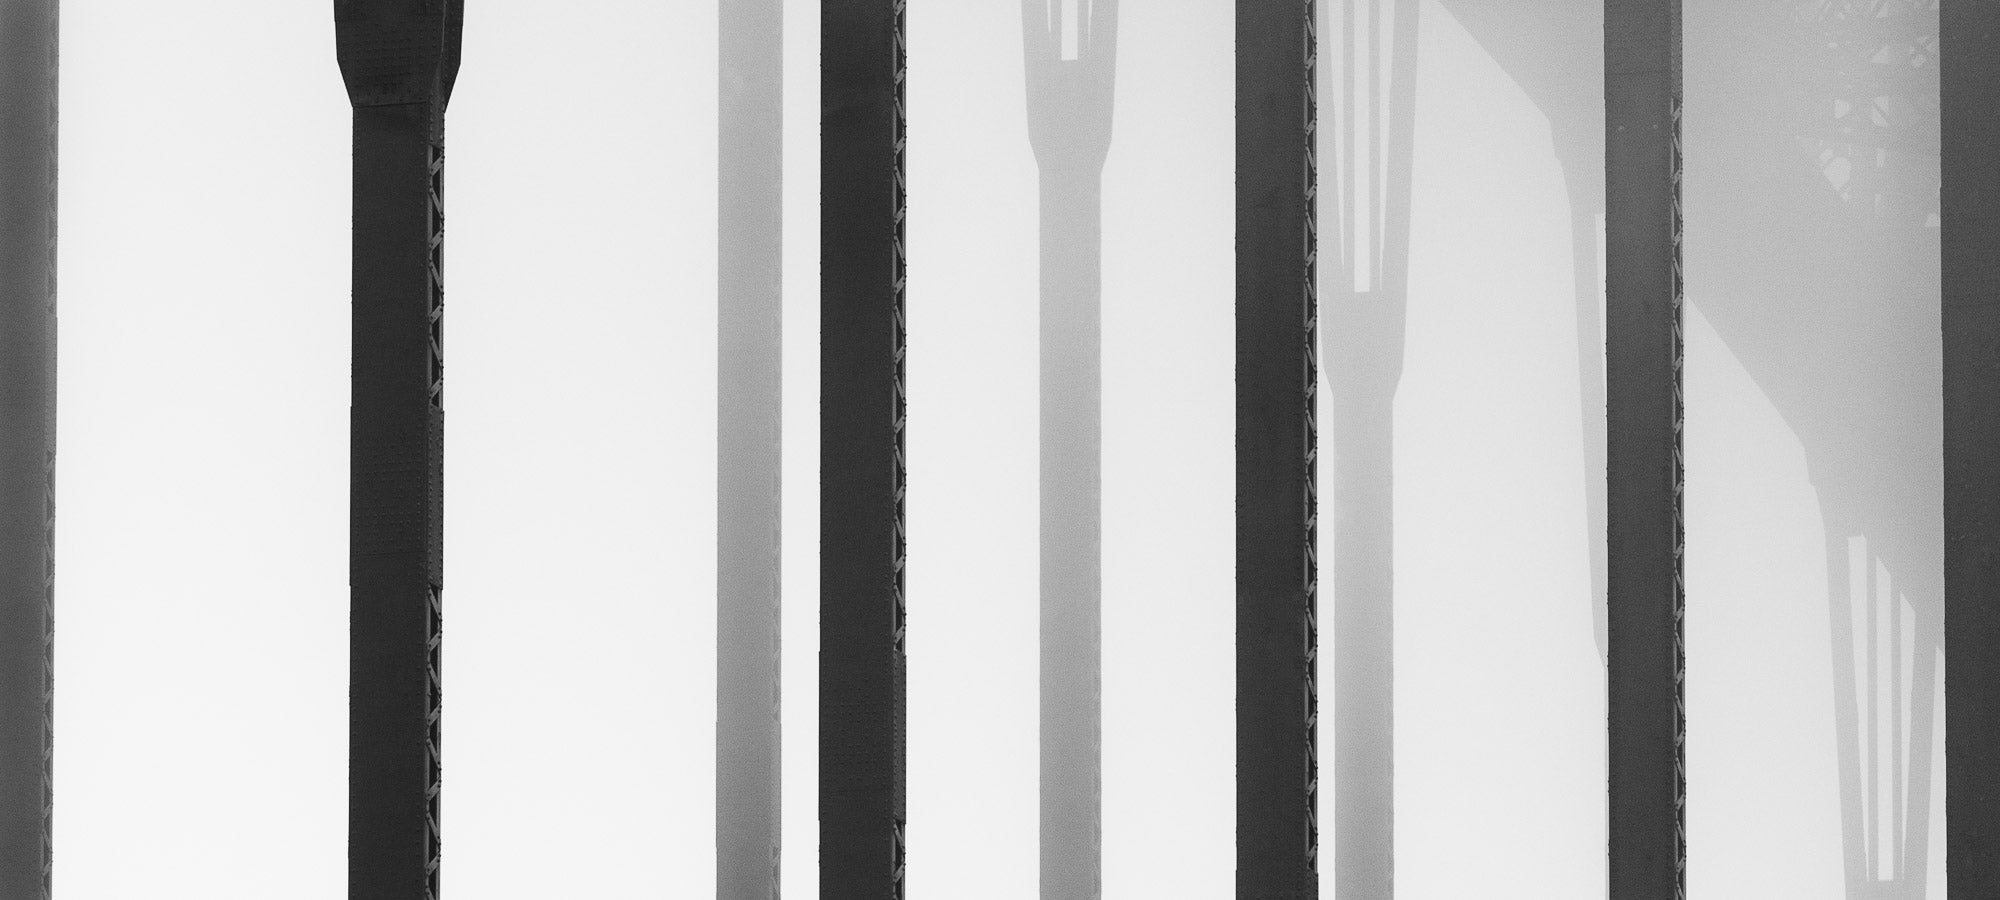 Black and white close-up of the vertical steel stanchions of Sydney Harbour Bridge, displaying a play of light and shadows.